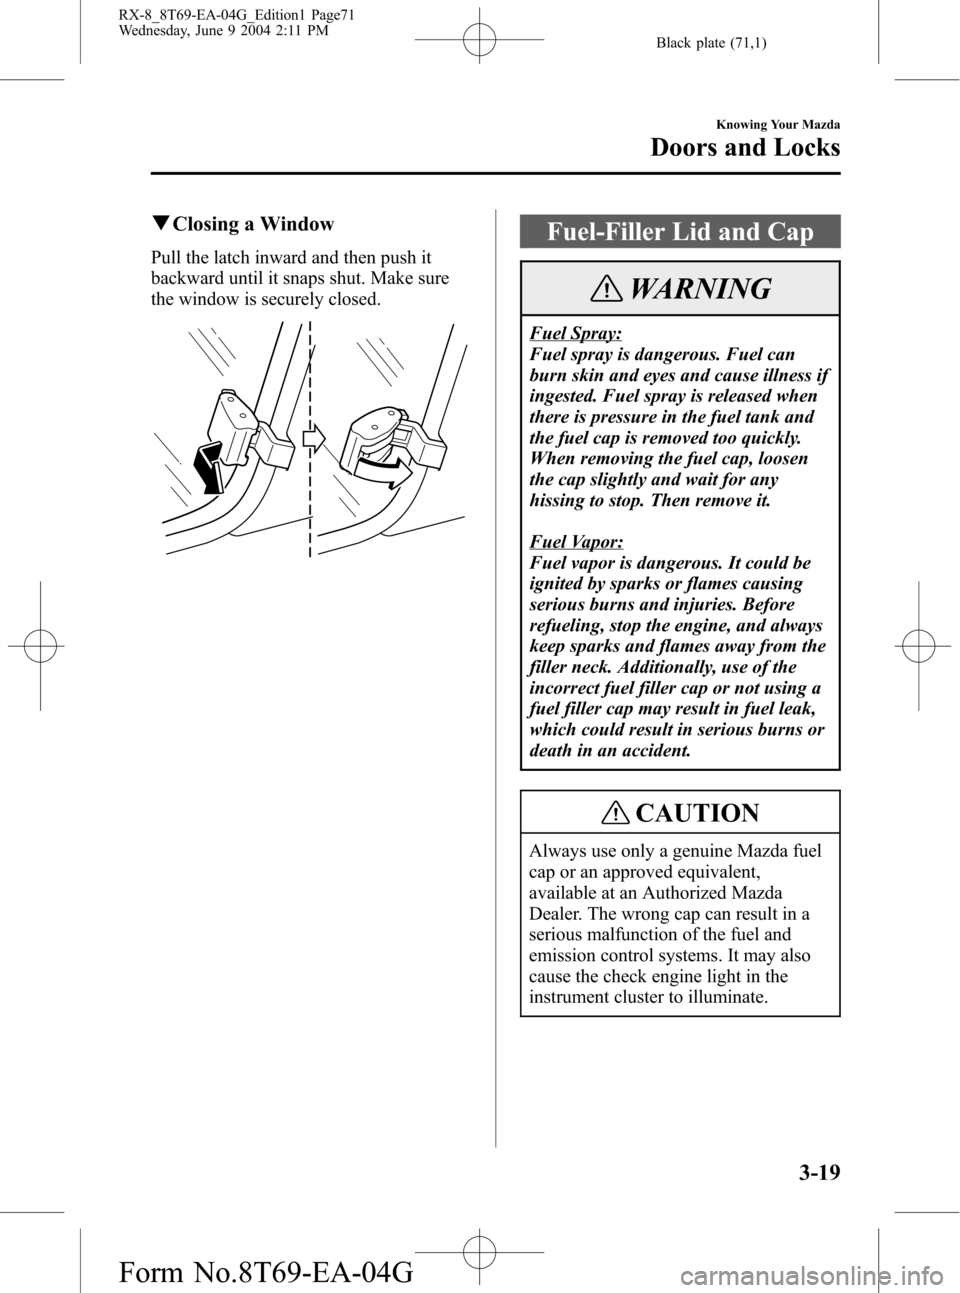 MAZDA MODEL RX 8 2005  Owners Manual (in English) Black plate (71,1)
qClosing a Window
Pull the latch inward and then push it
backward until it snaps shut. Make sure
the window is securely closed.
Fuel-Filler Lid and Cap
WARNING
Fuel Spray:
Fuel spra